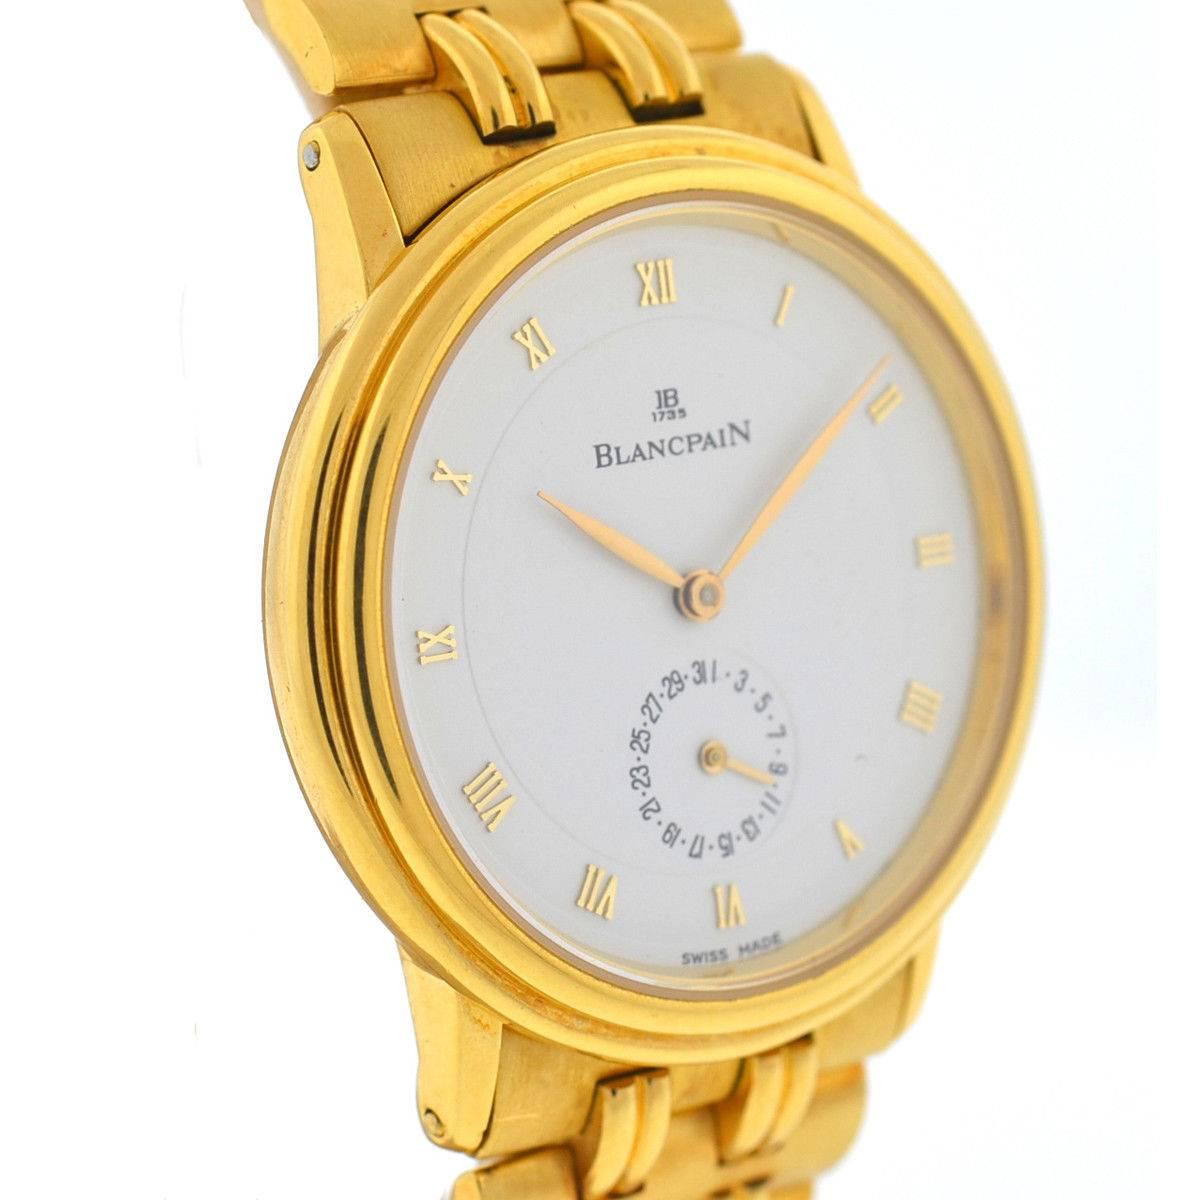 Company - Blancpain
Model - VIlleret 4795
Case Metal - 18kt Yellow Gold
Case Size - 37mm
Dial - White
Weight - 125.5g
Bracelet - 18kt Yellow Gold
Crystal - Sapphire Crystal
Movement - Automatic
Features - Hours, Minutes, Date
Includes - Watch